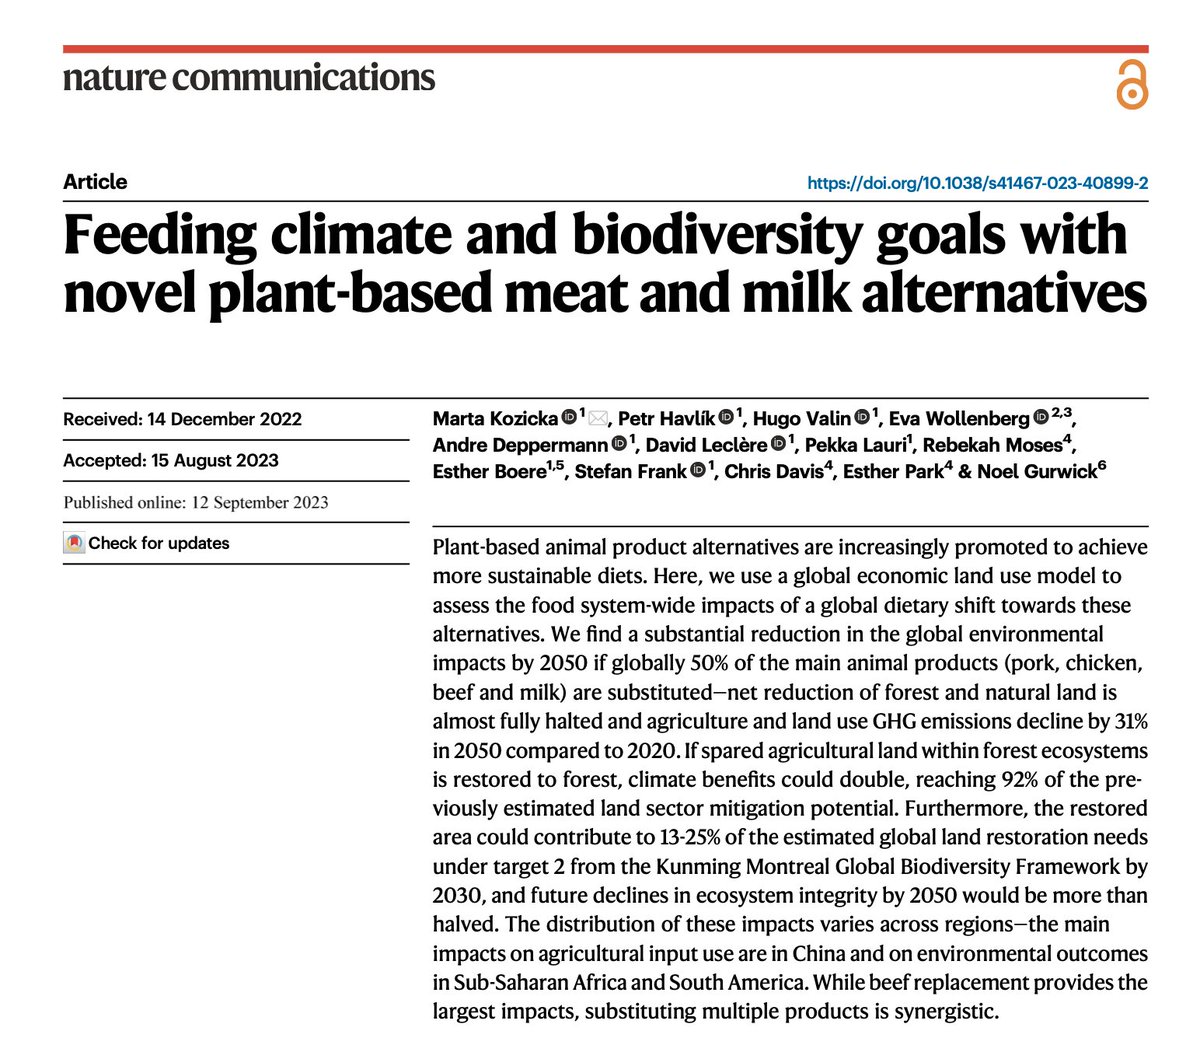 Replacing 50% of meat and milk products with plant-based alternatives by 2050 can reduce agriculture and land use related greenhouse gas emissions by an incredible 31% and halt the degradation of forest and natural land according to this @NatureComms study. 
#SustainableDiets